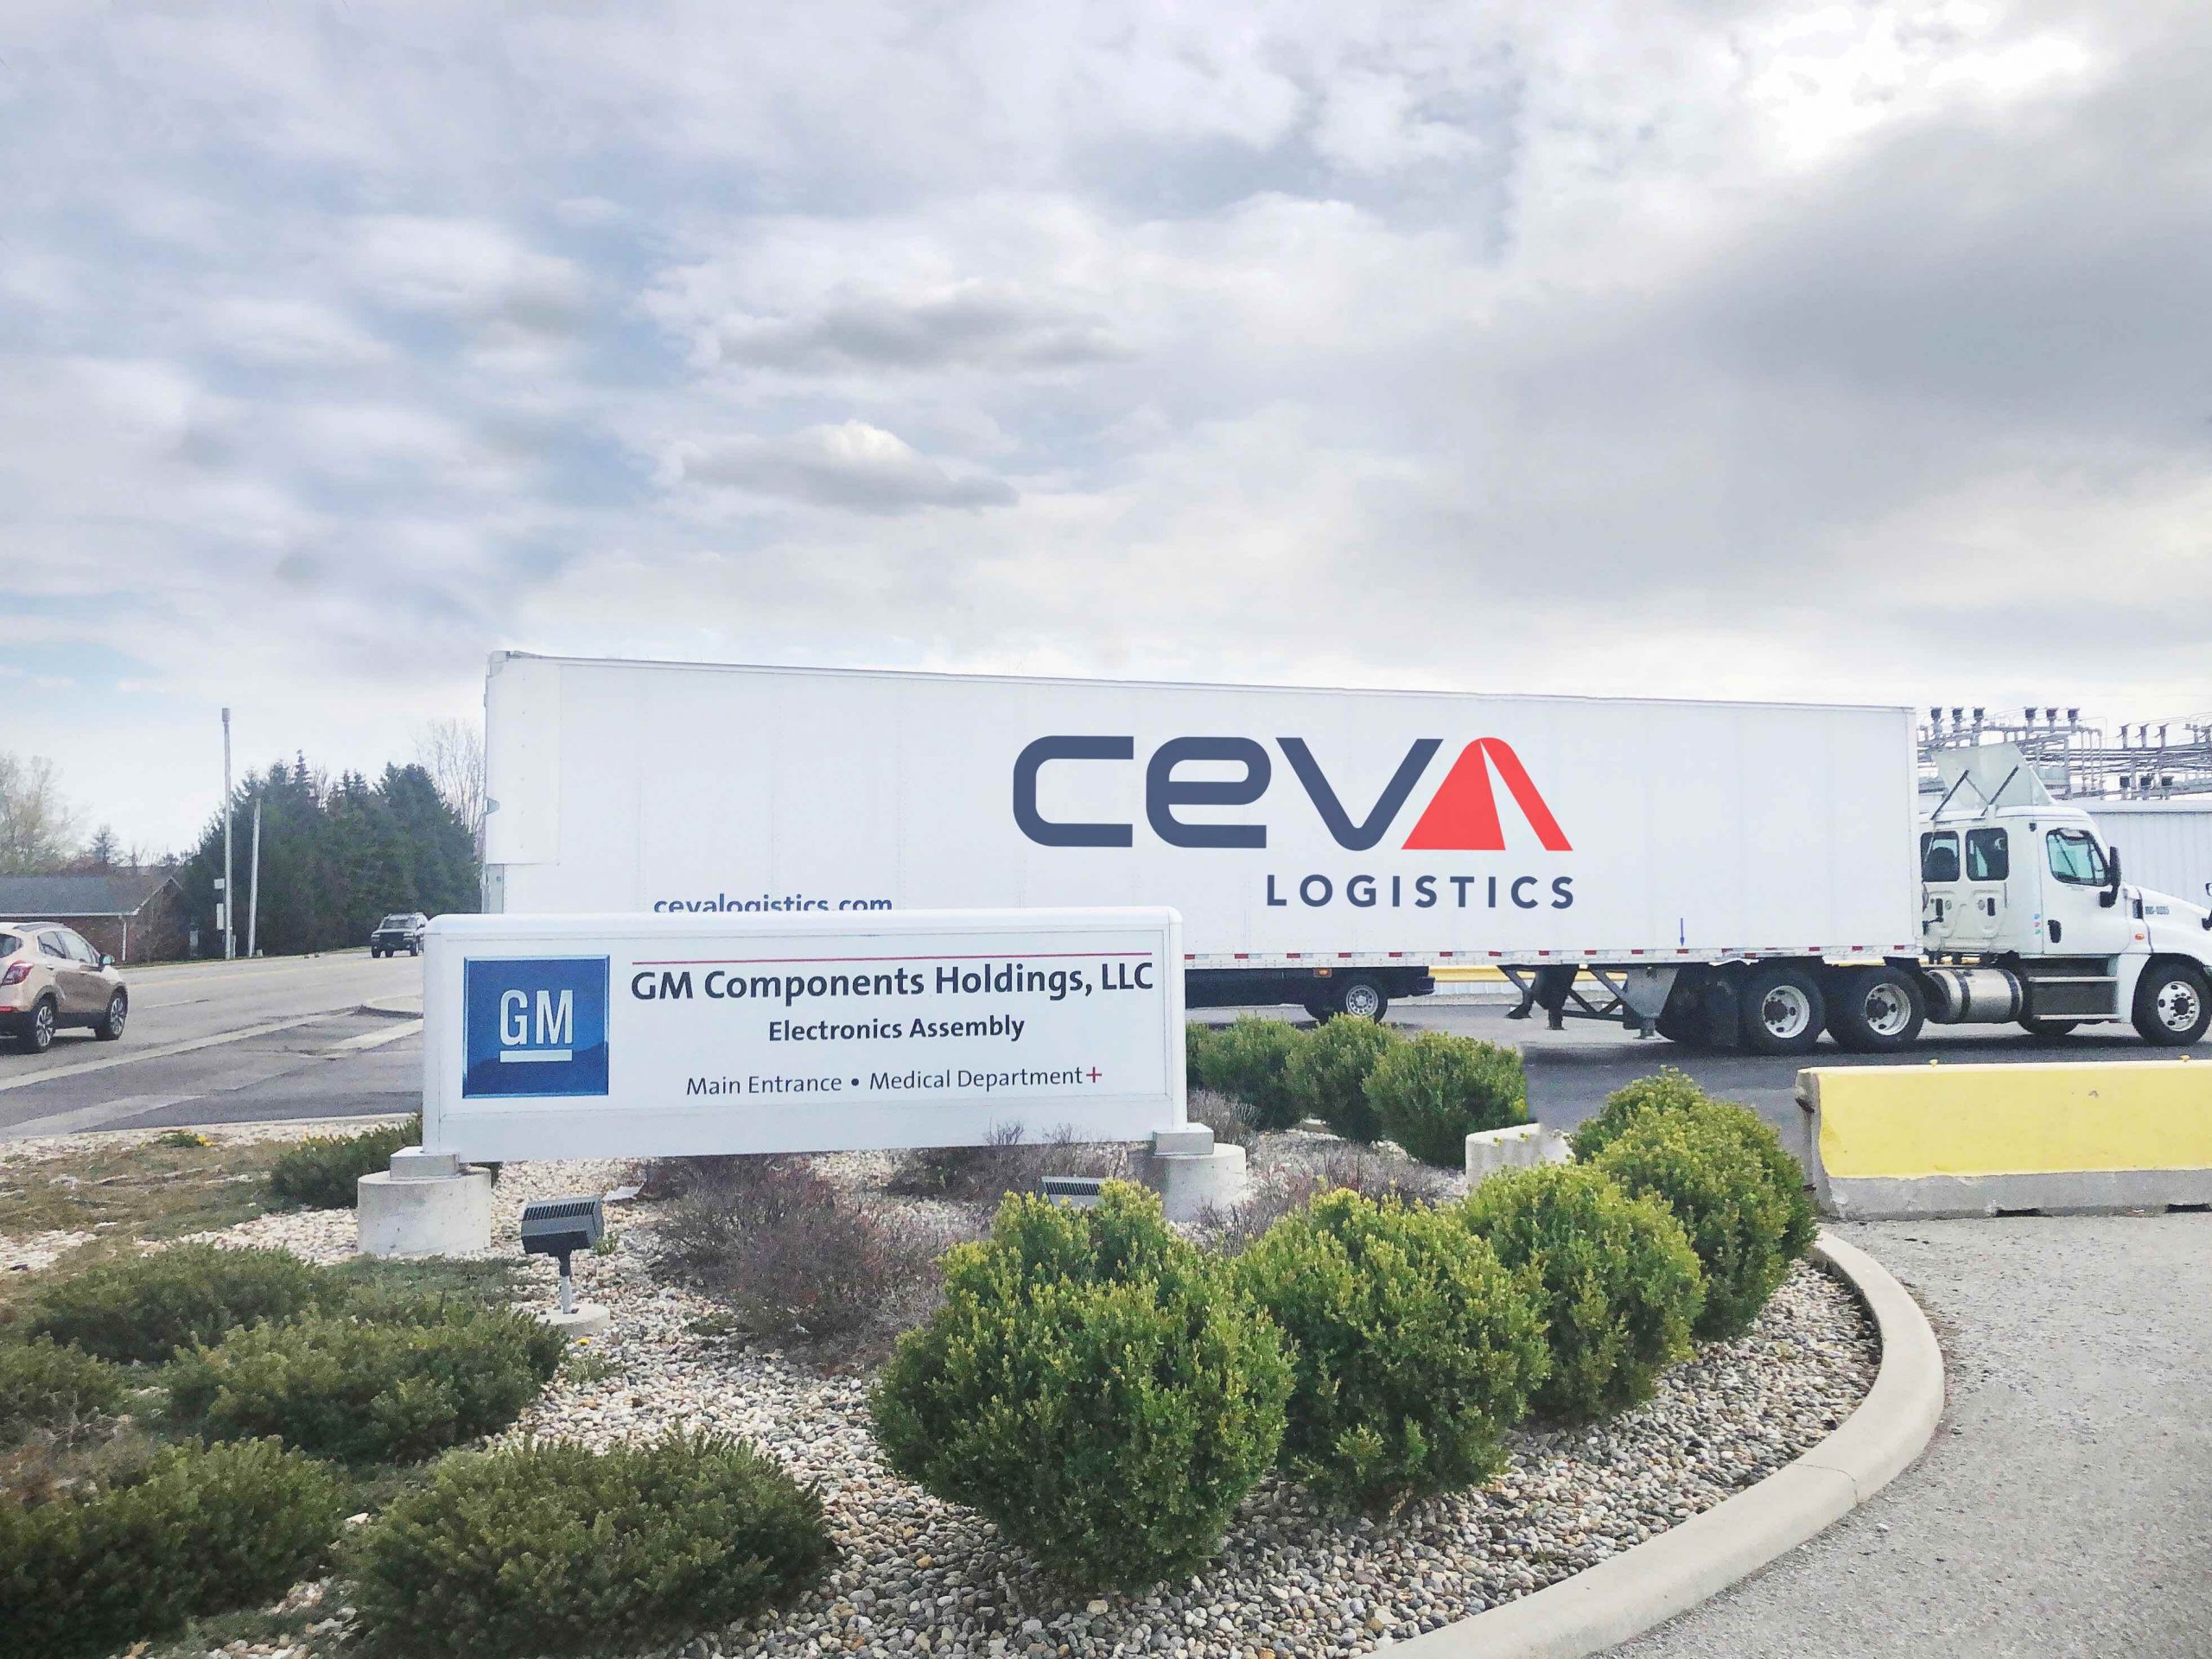 CEVA Logistics marks strategic investment with  CargoWise rollout